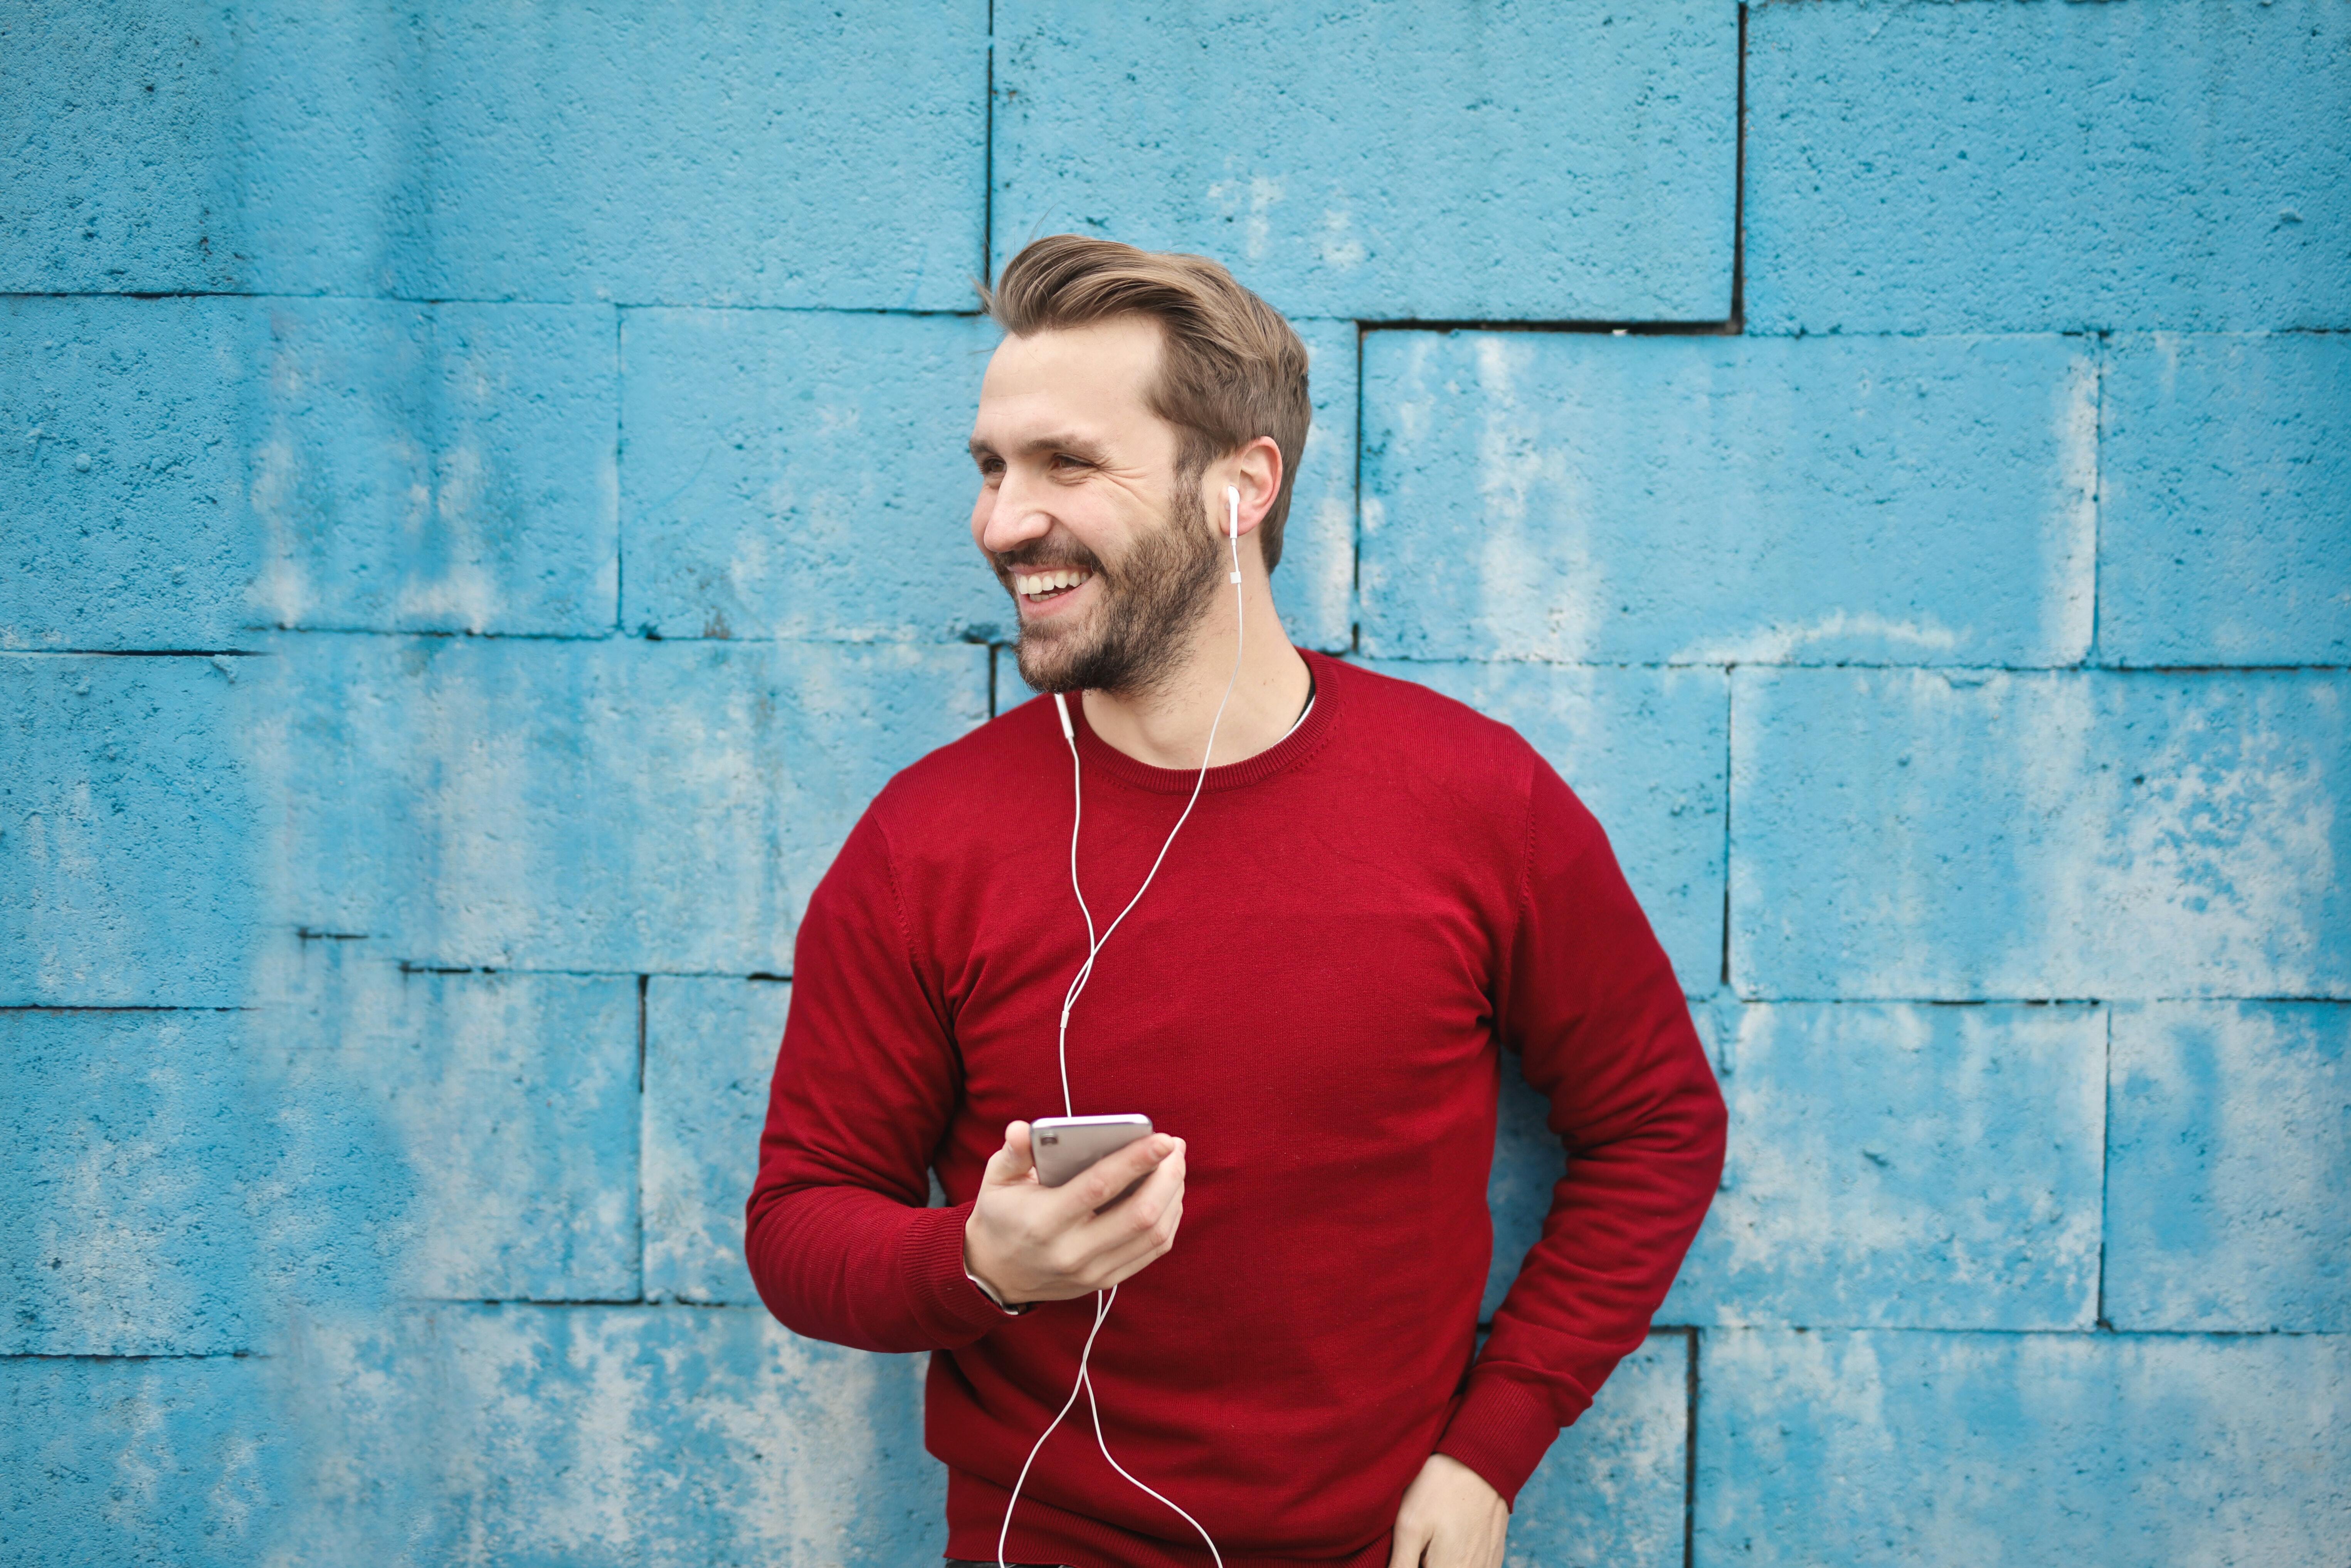 A man in a red sweater listening to earphones, standing in front of a blue wall.